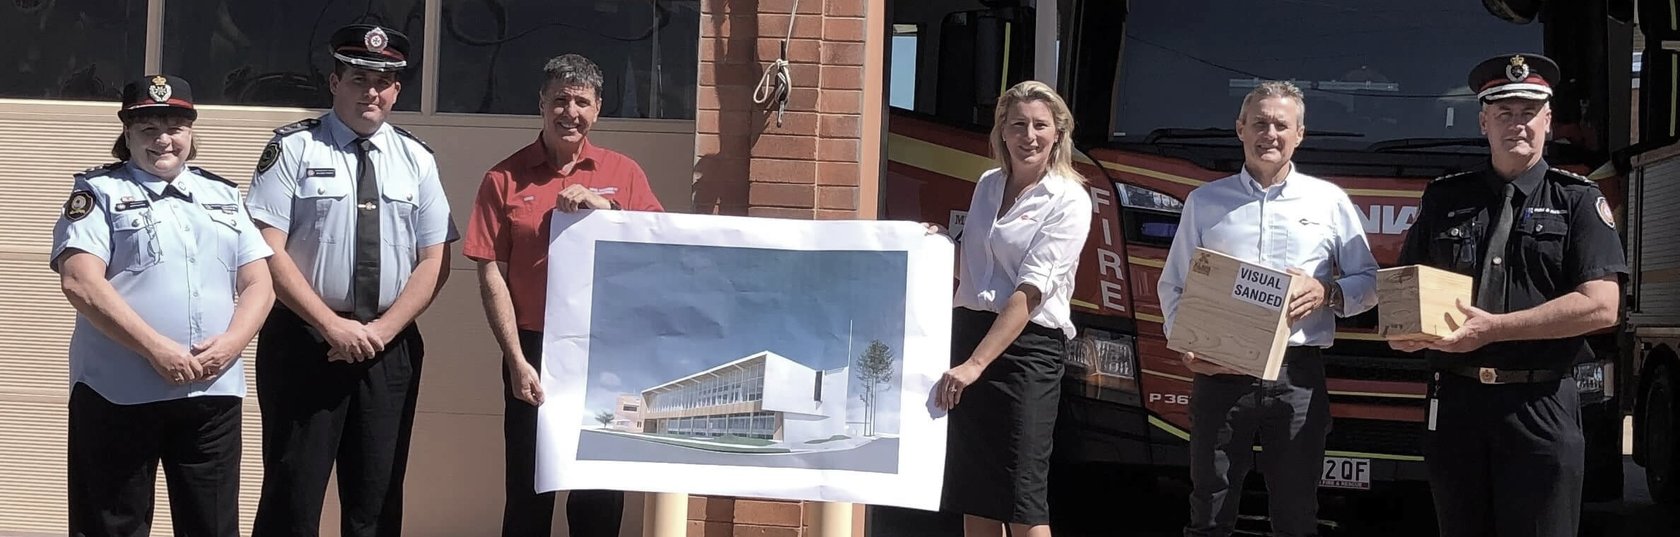 Engineered timber the solution to replacement of heritage fire station